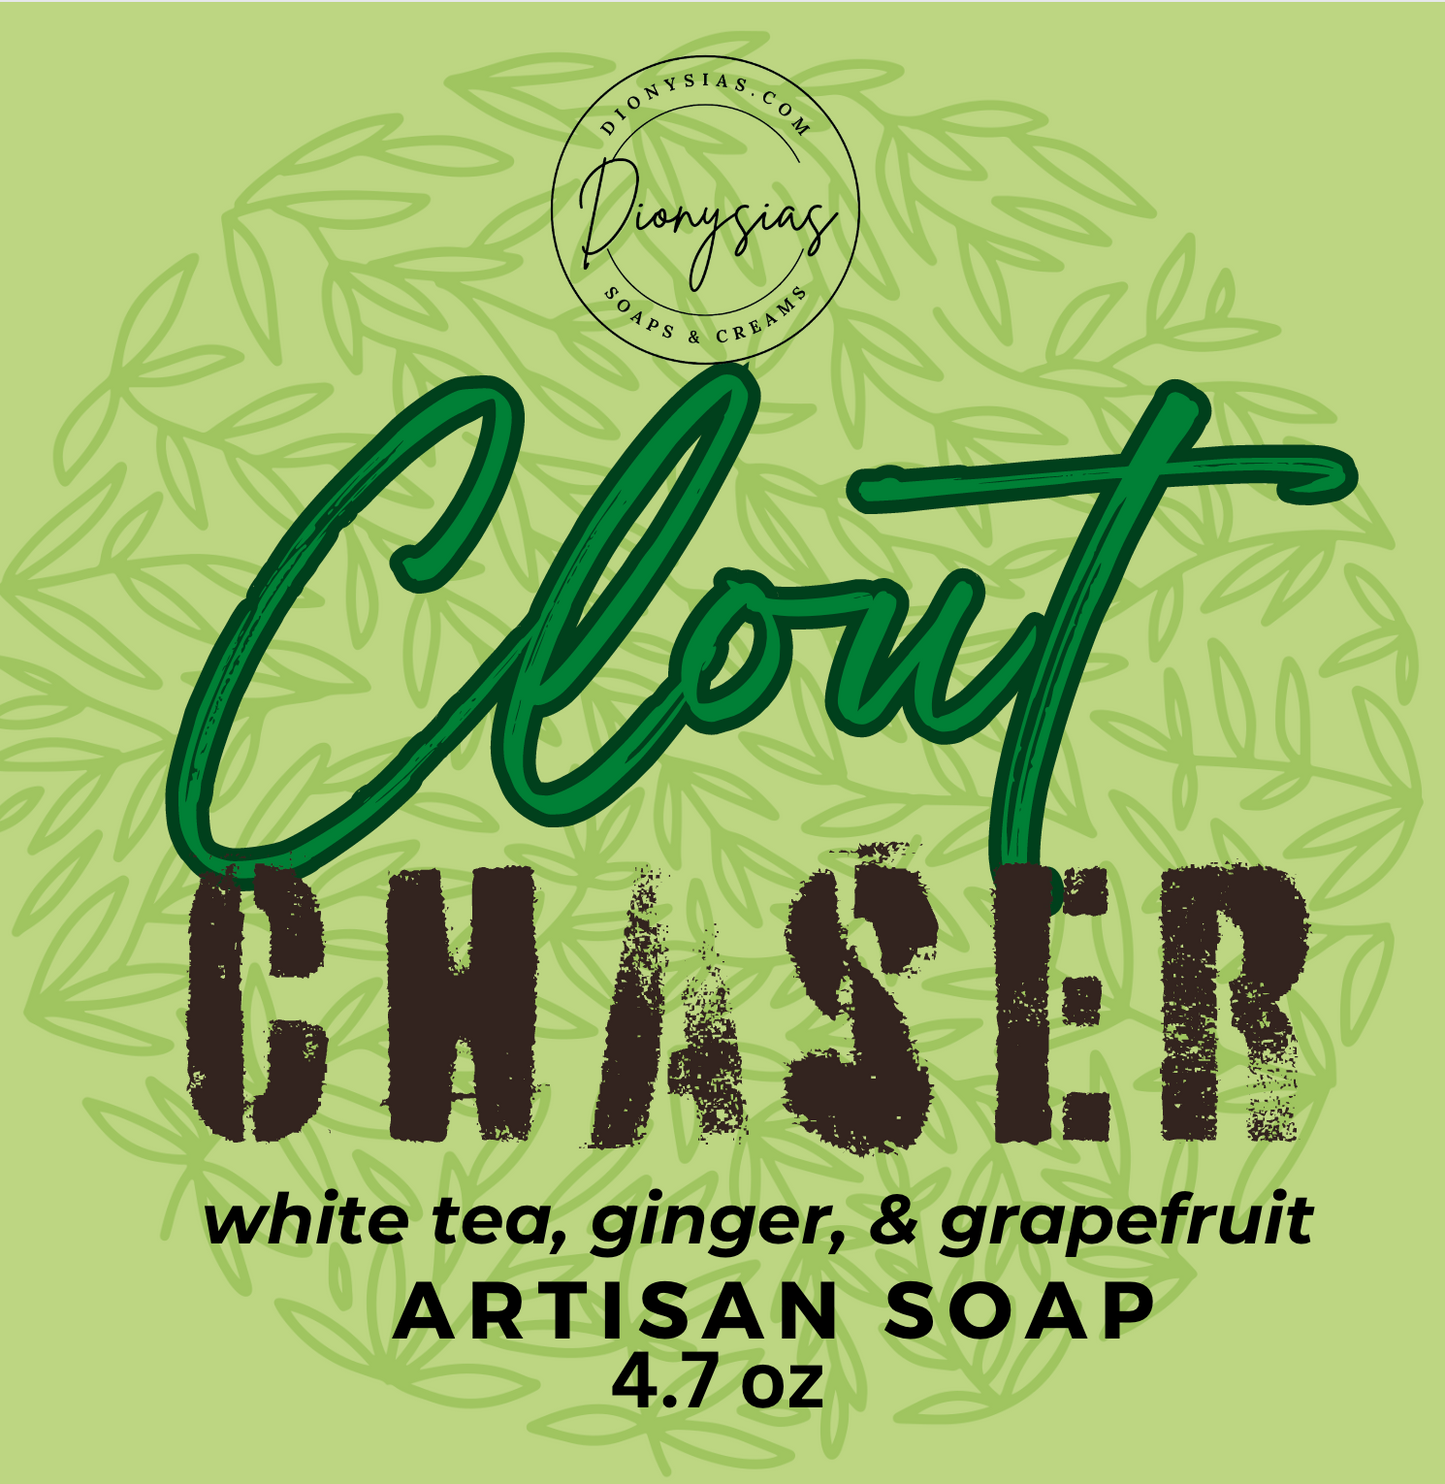 Clout Chaser (artisan soap)